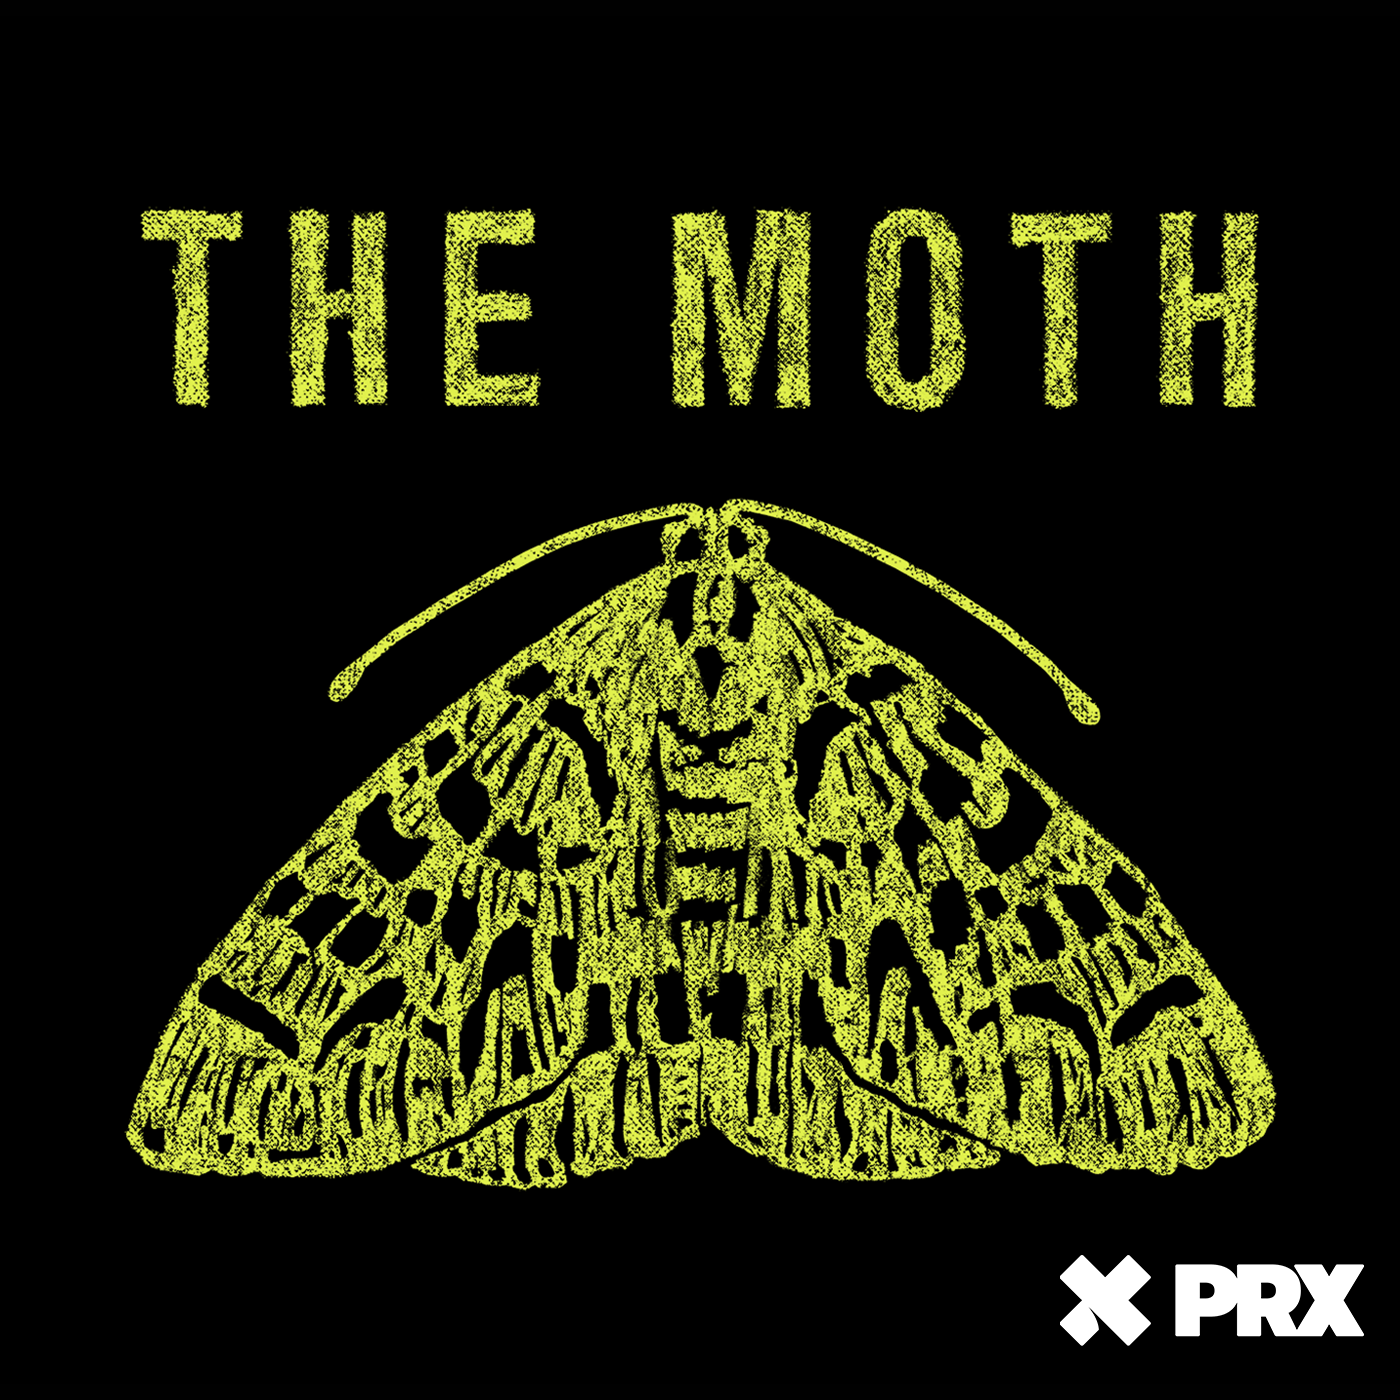 The Moth Radio Hour: When Time Slows Down